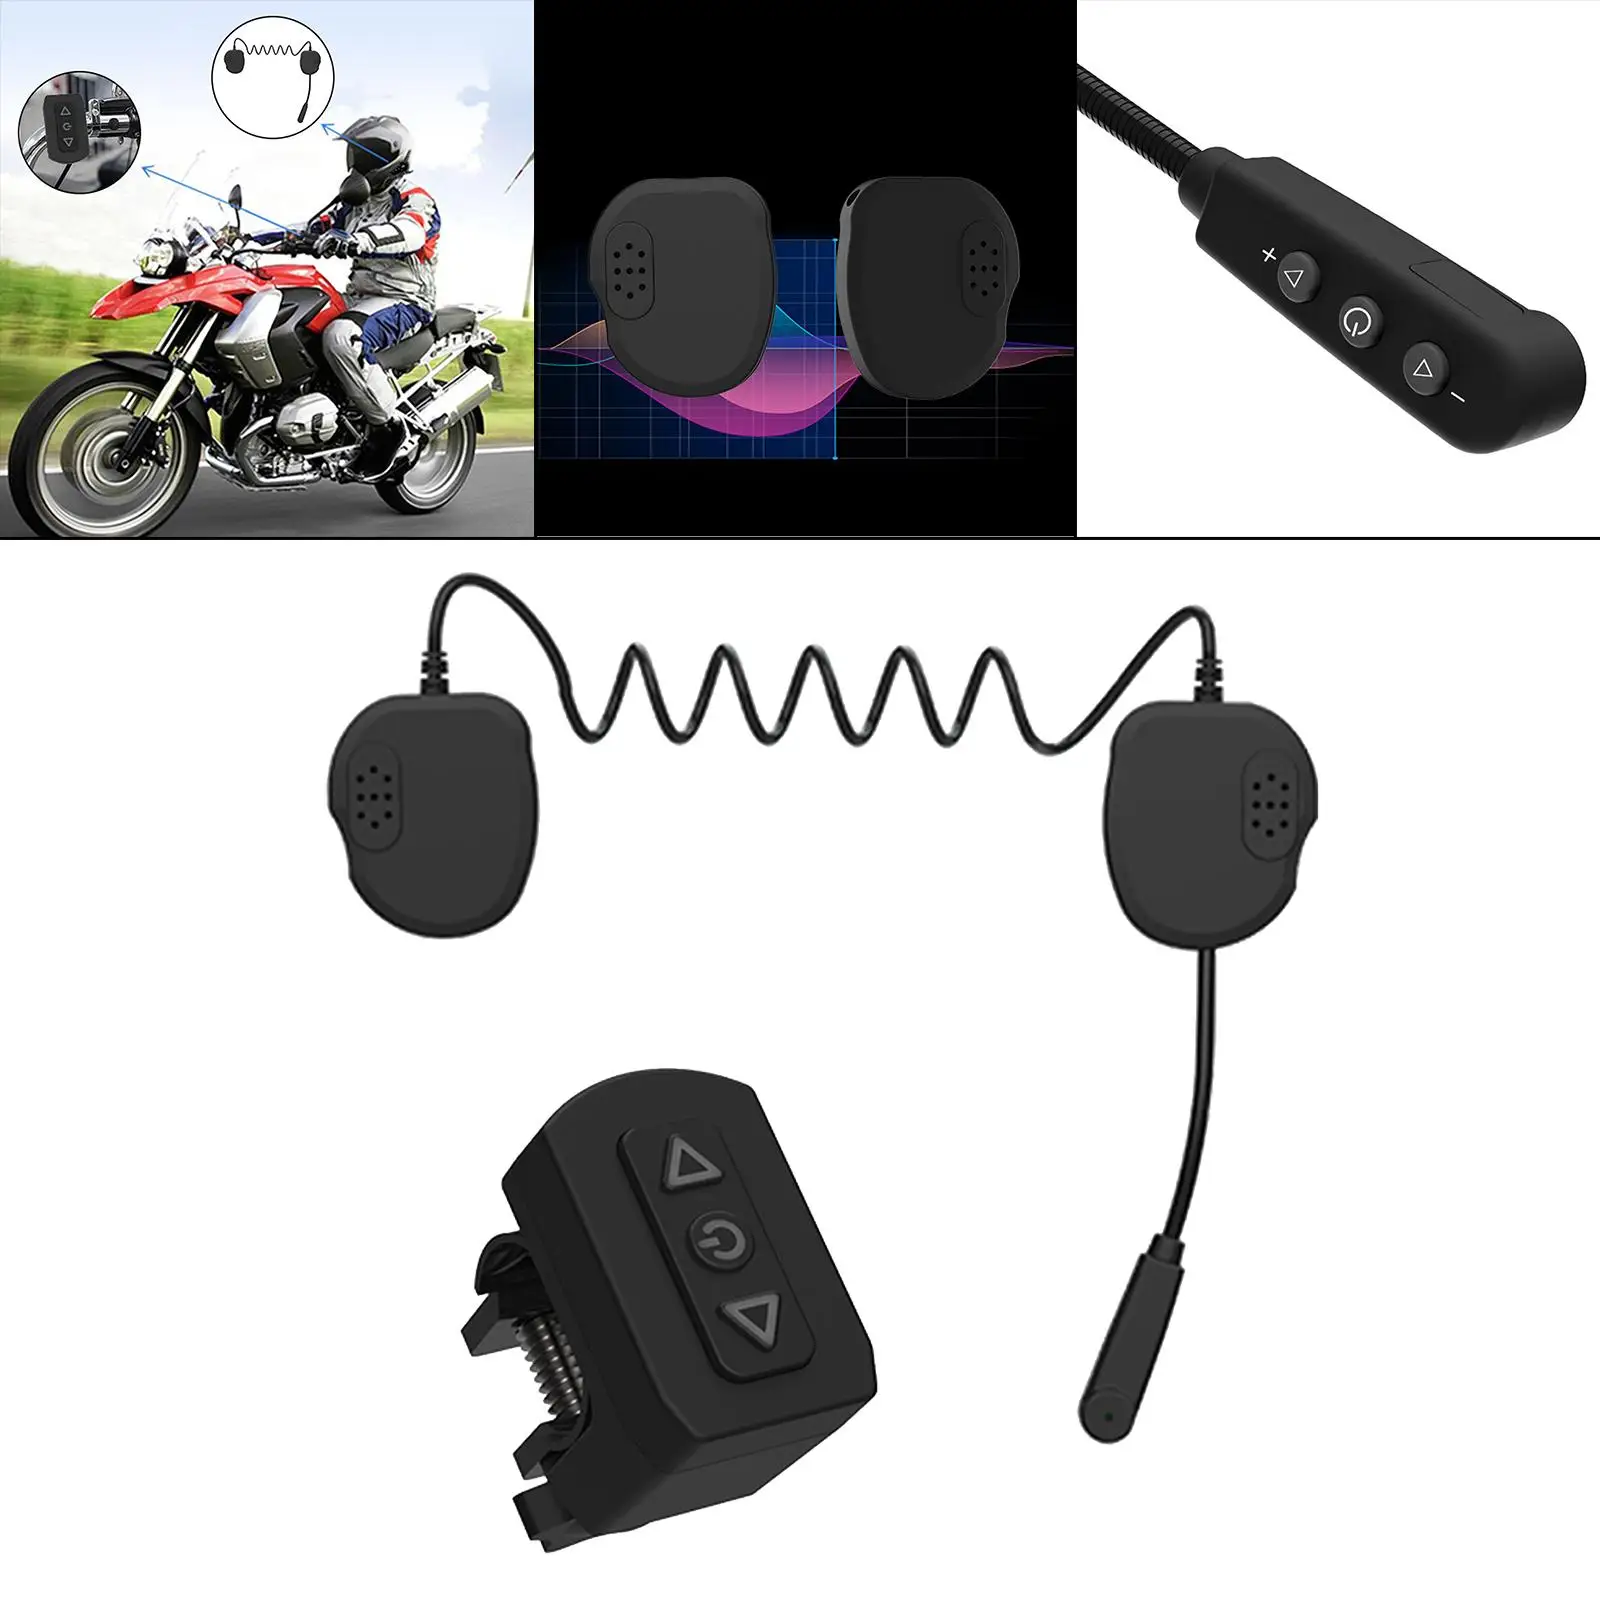 Motorcycle Helmet Bluetooth Headset Earphone Convenient with Microphone Quality Sound for Mobile Phone MP3 Stereo Free Your Hand